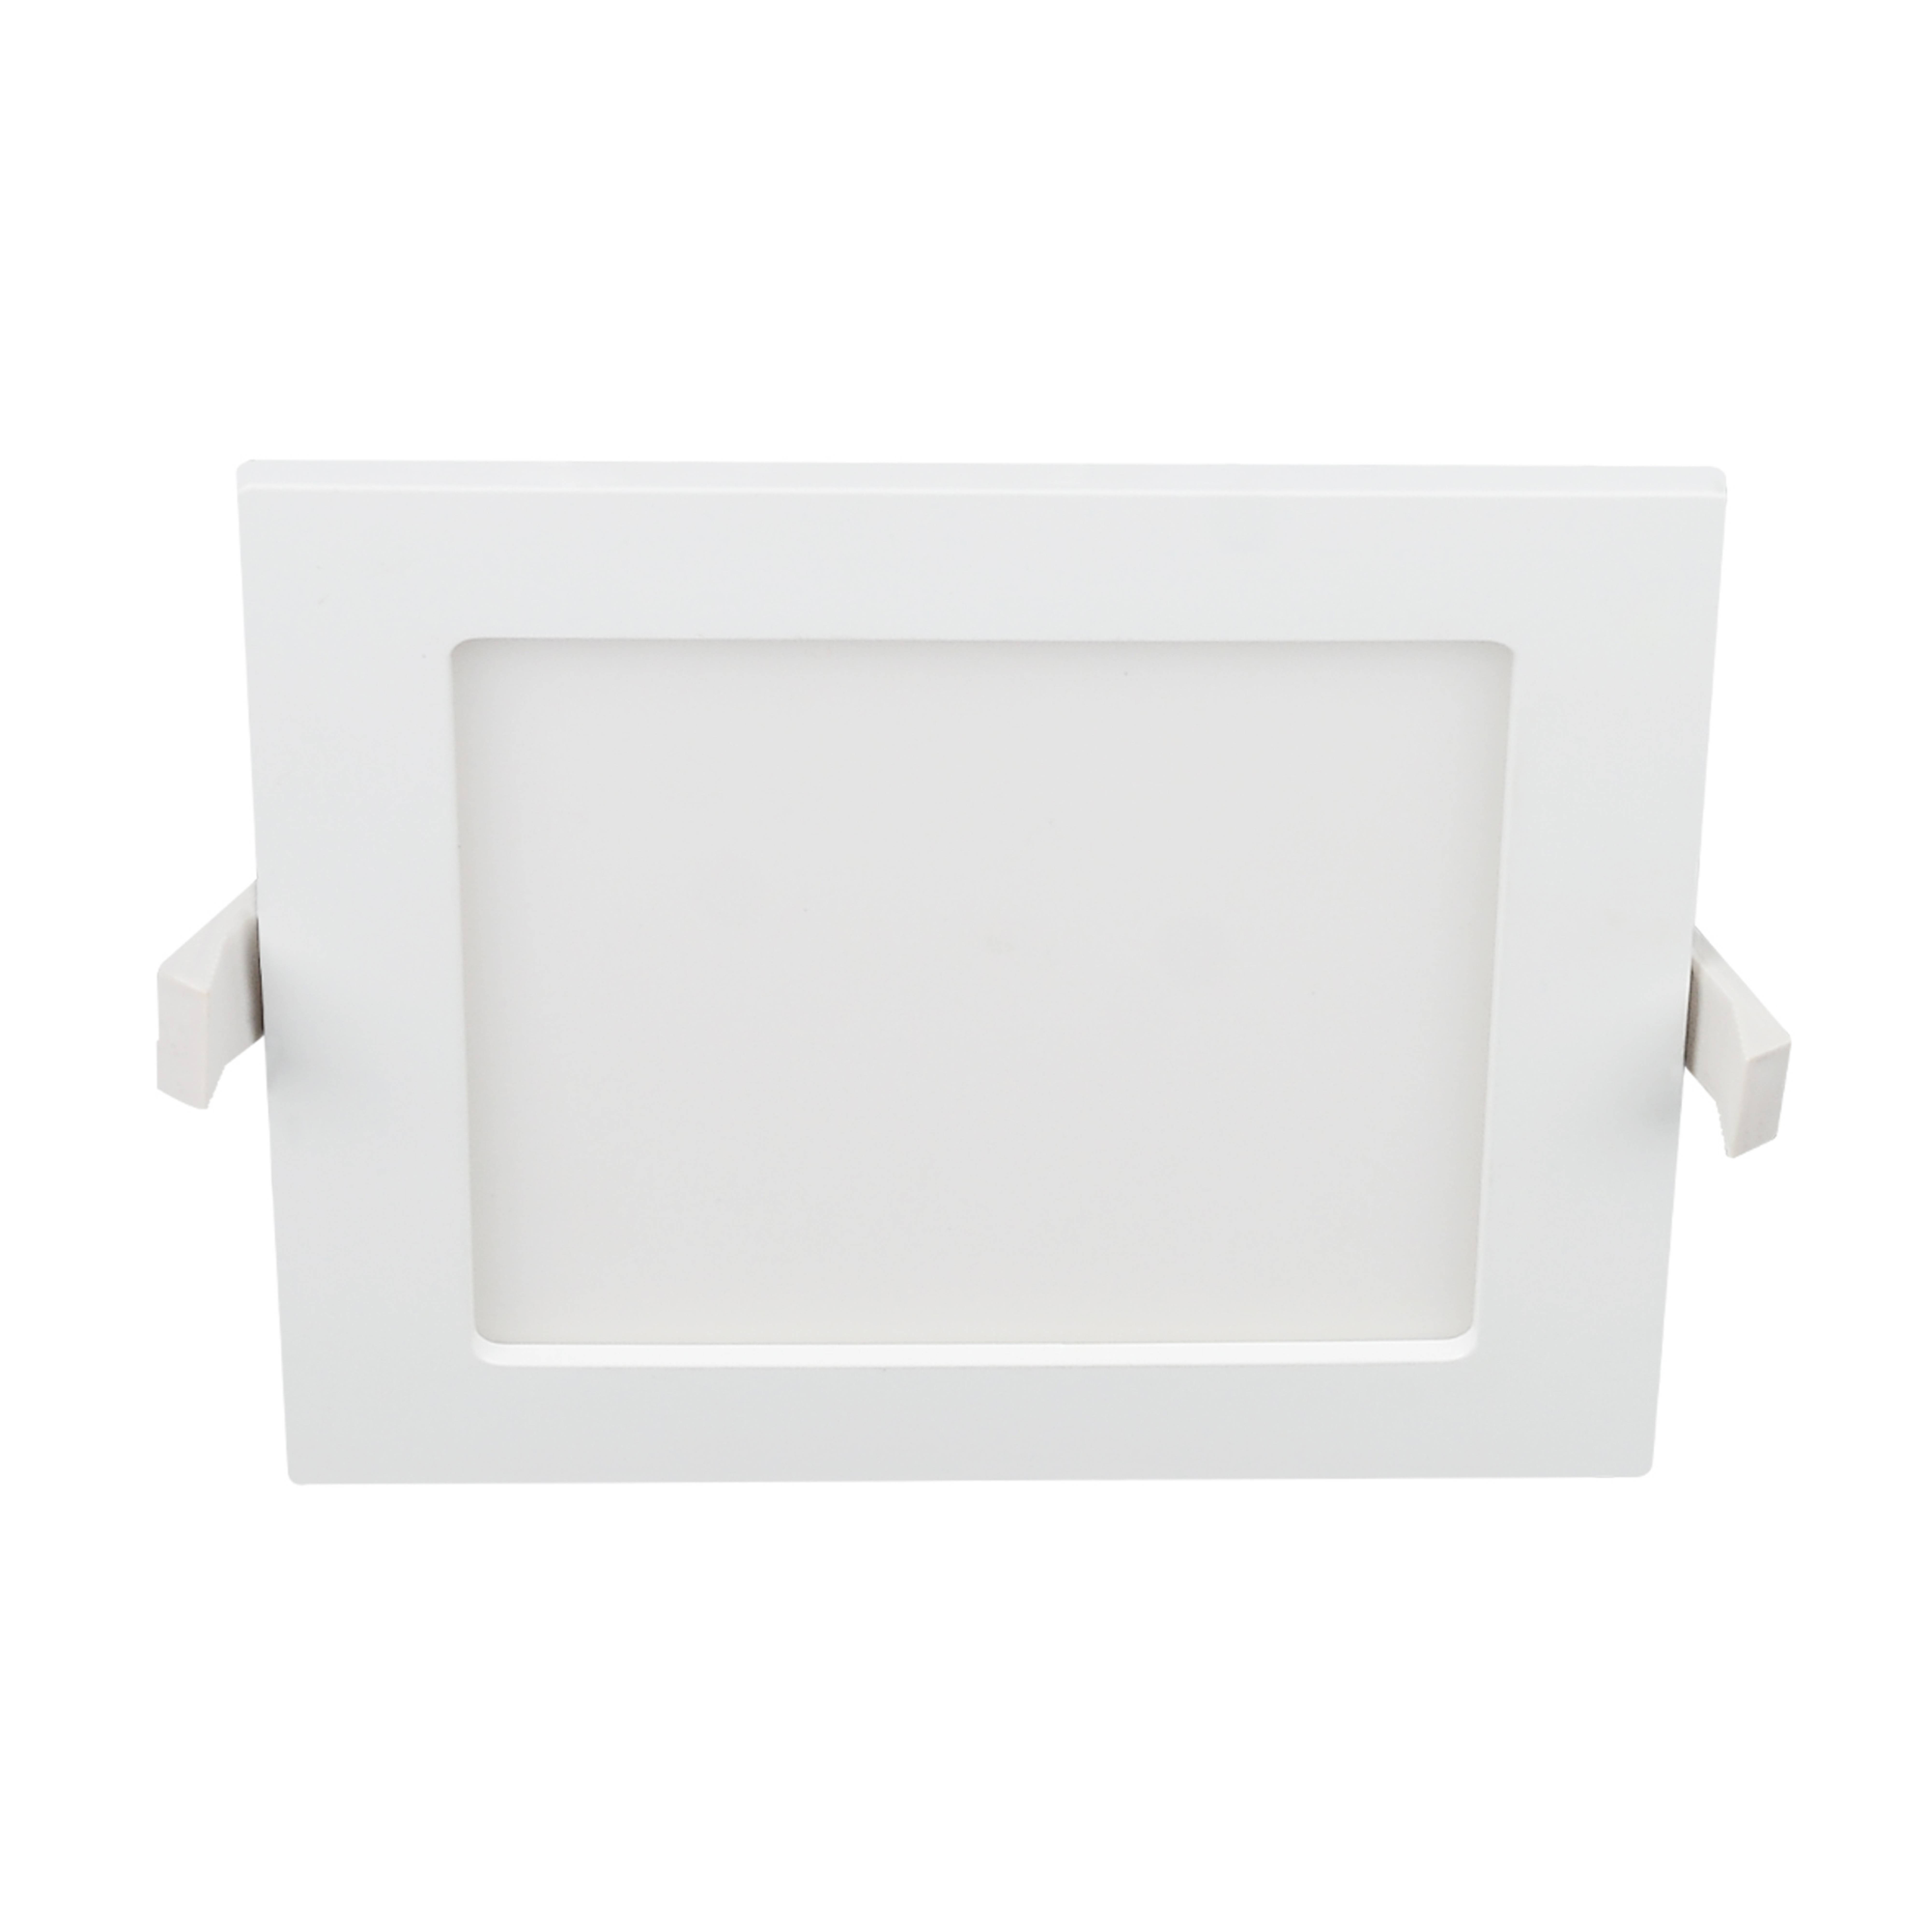 Prios LED recessed light Helina, white, 22 cm, 24 W, dimmable